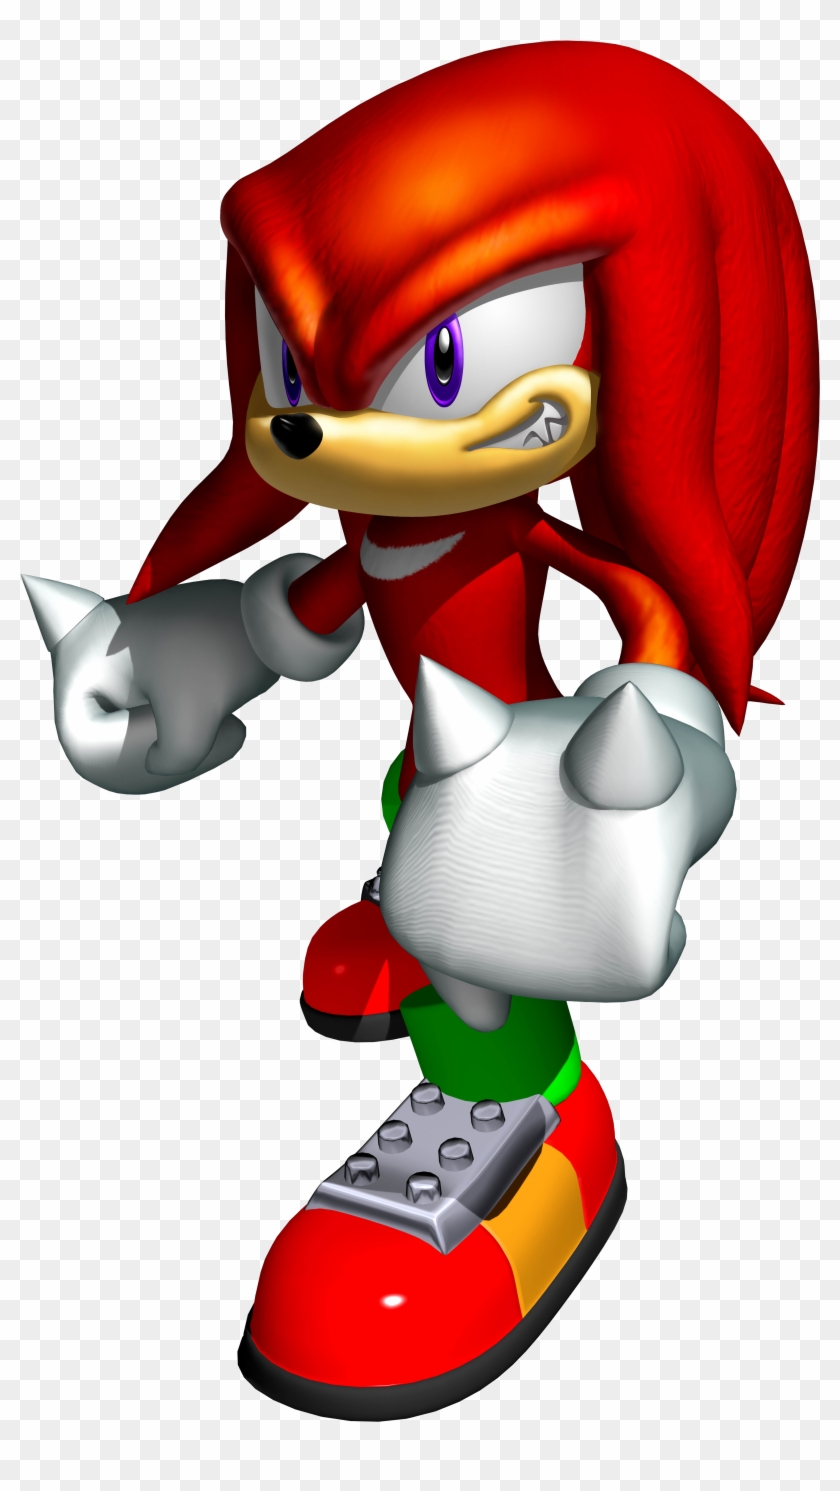 Knuckles Heroes 32 - Sonic The Hedgehog Clipart